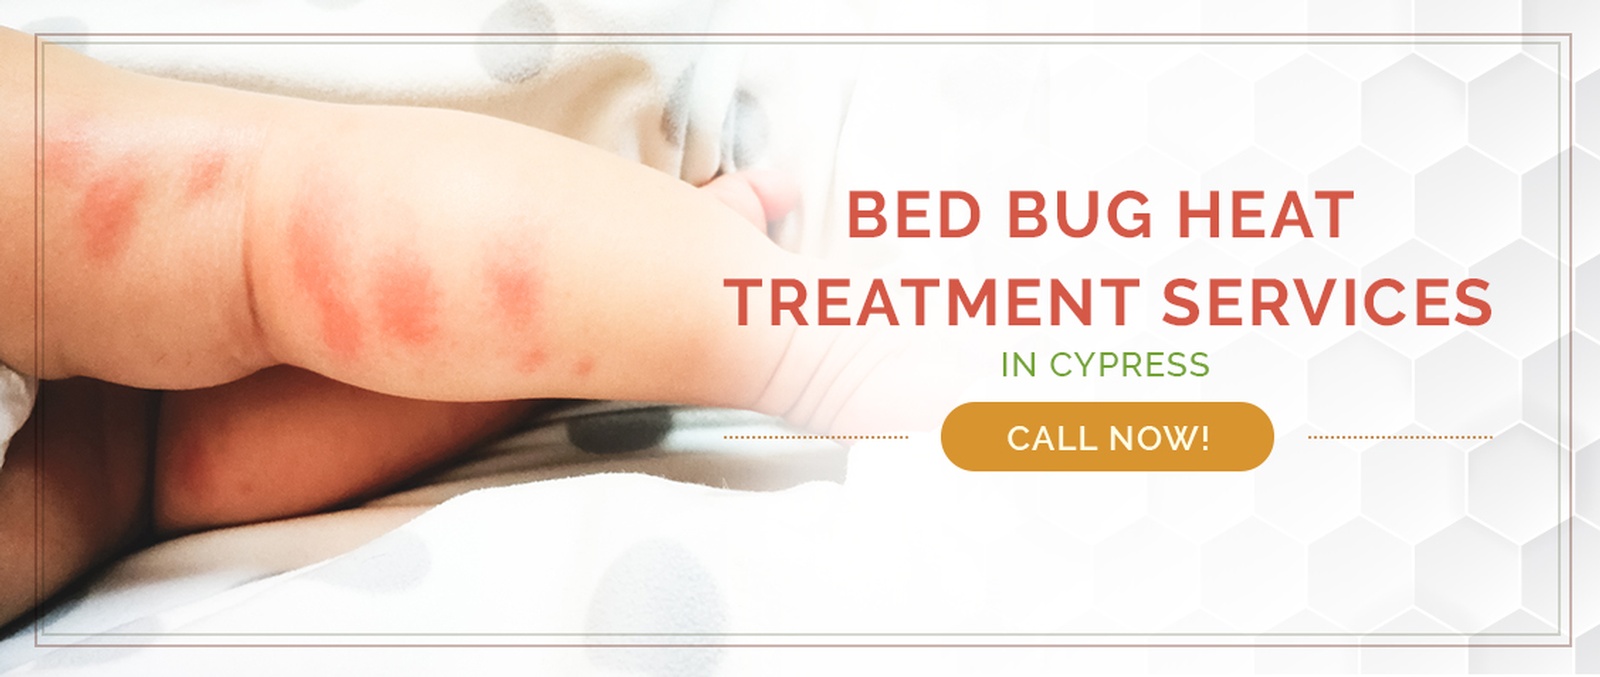 Cypress Bed Bug Treatment / Heater Rental Services by Houston Bed Bug Heaters